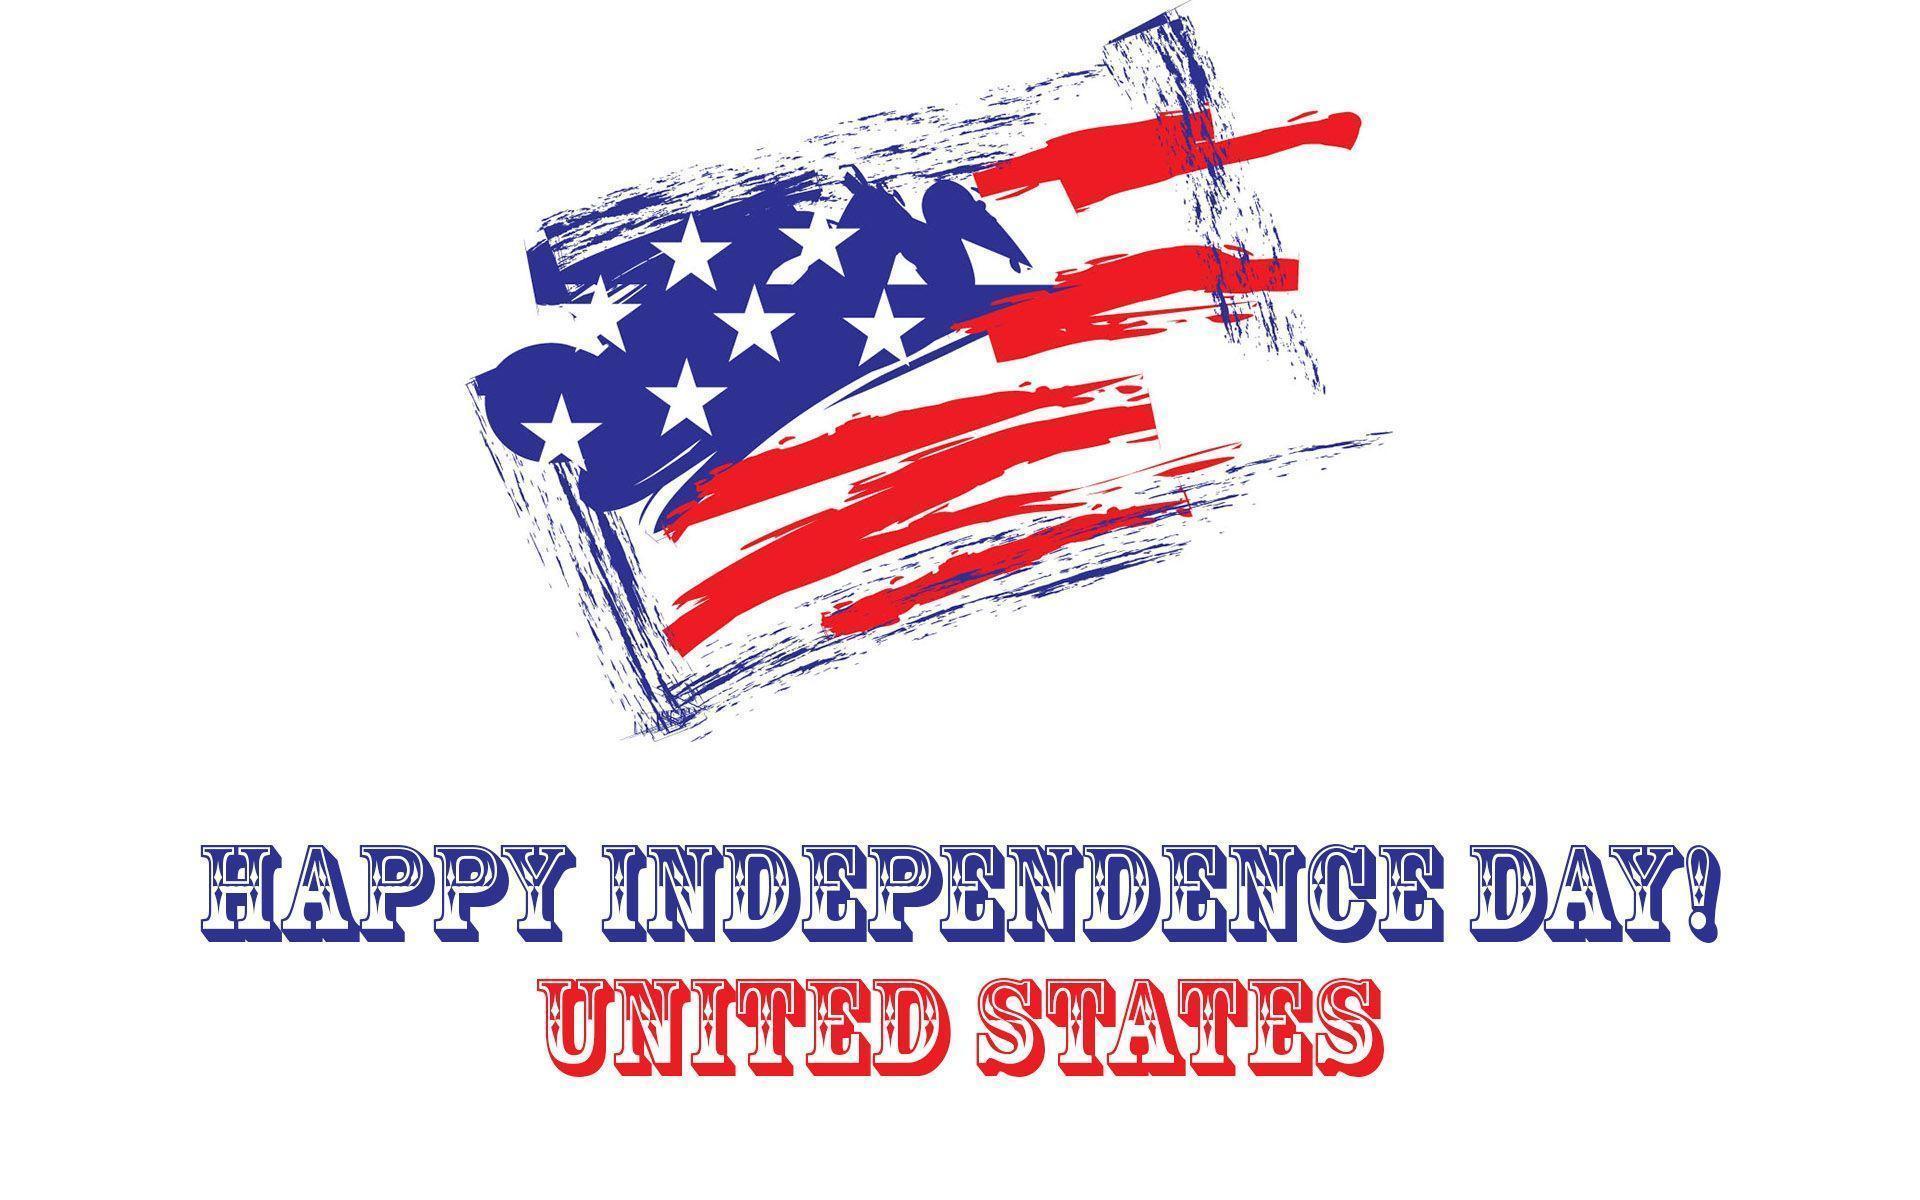 4th July 2016 Independence Day USA Quotes Greetings Wishes Image